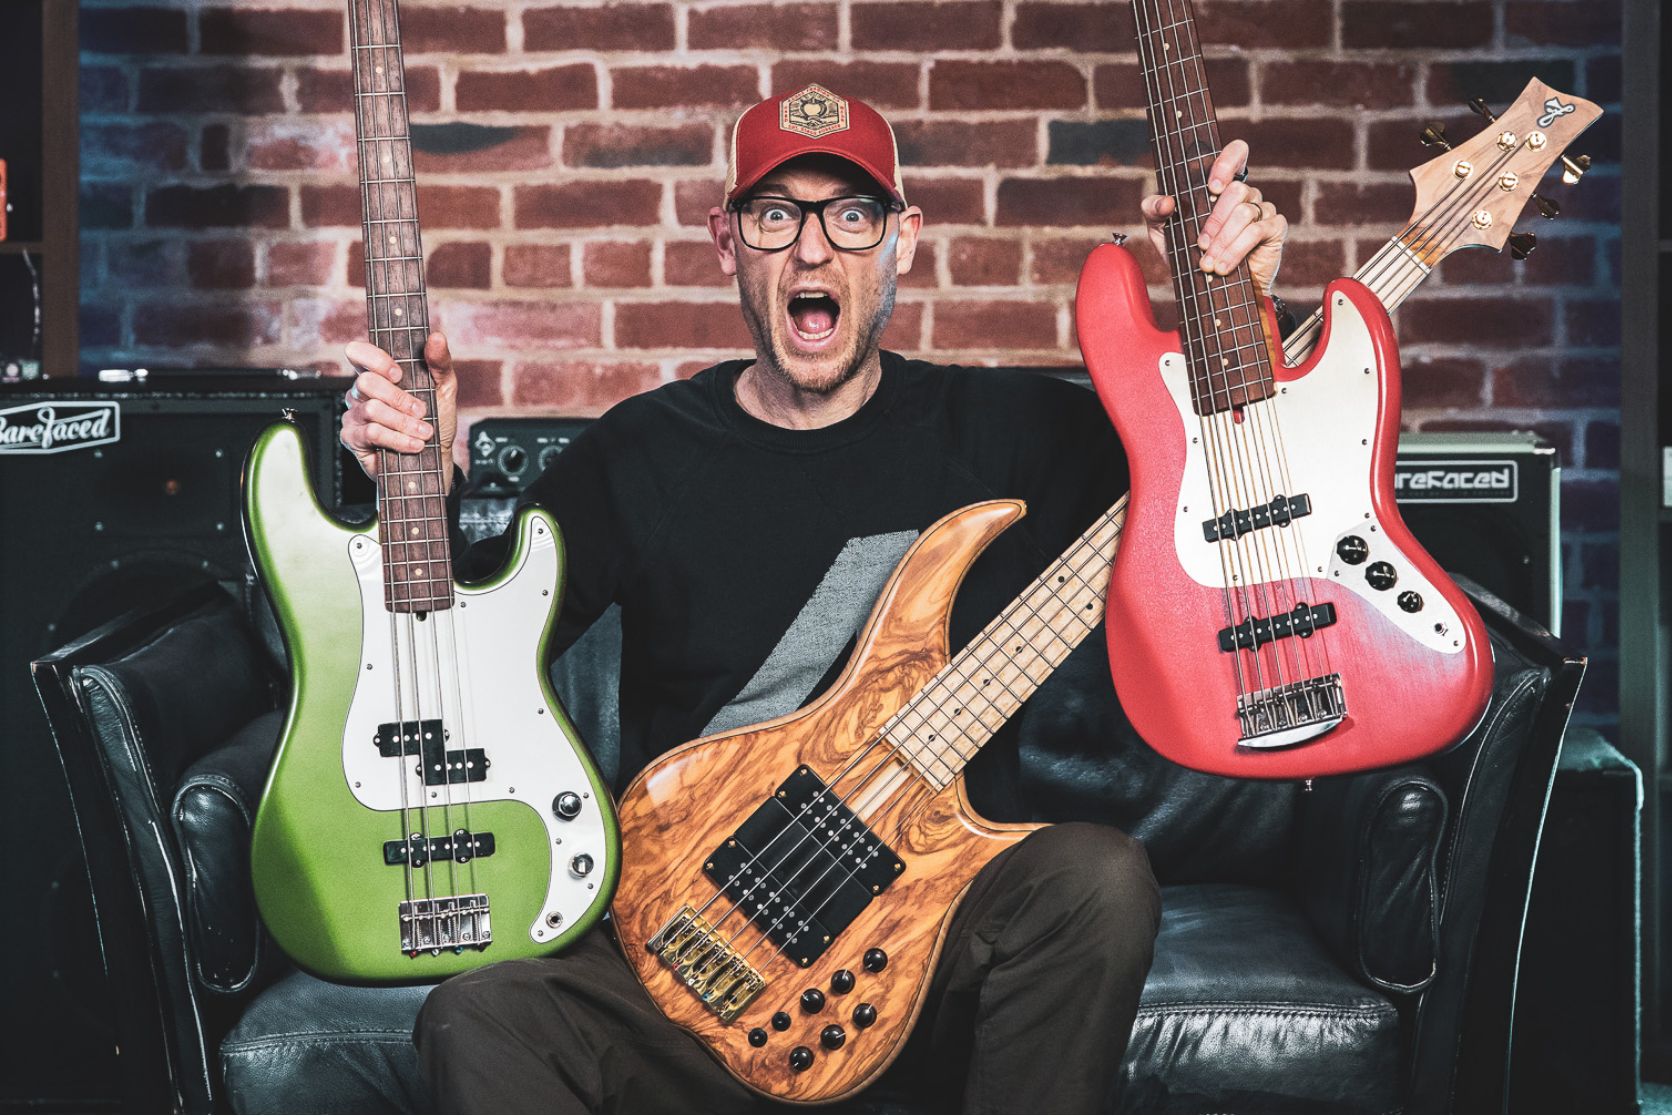 Scott with all basses